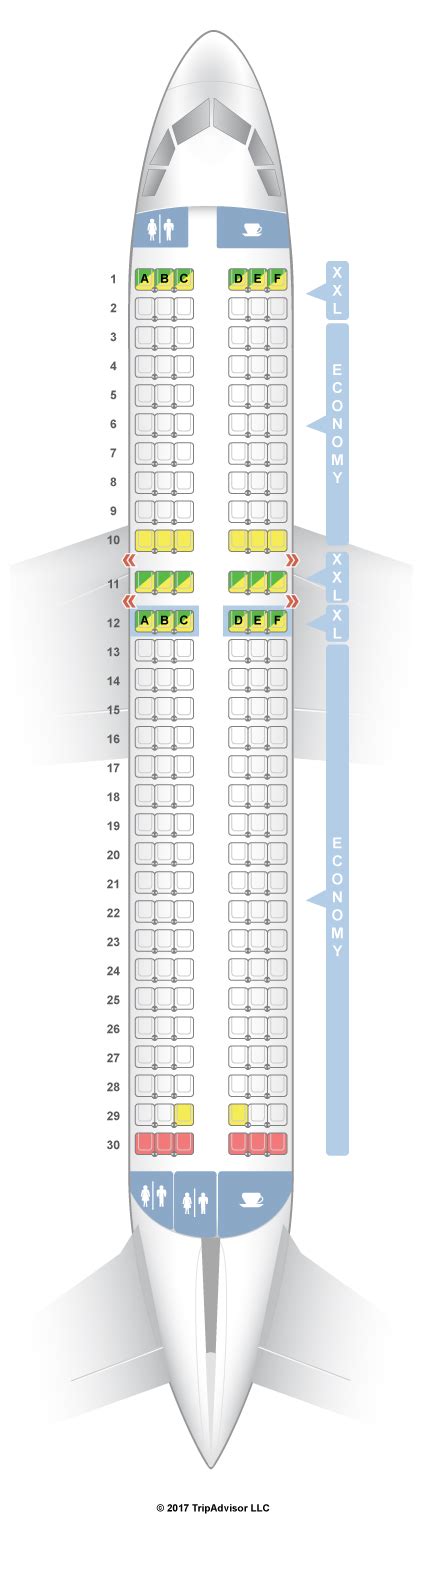 Aircraft Airbus A Neo Seat Map Image To U